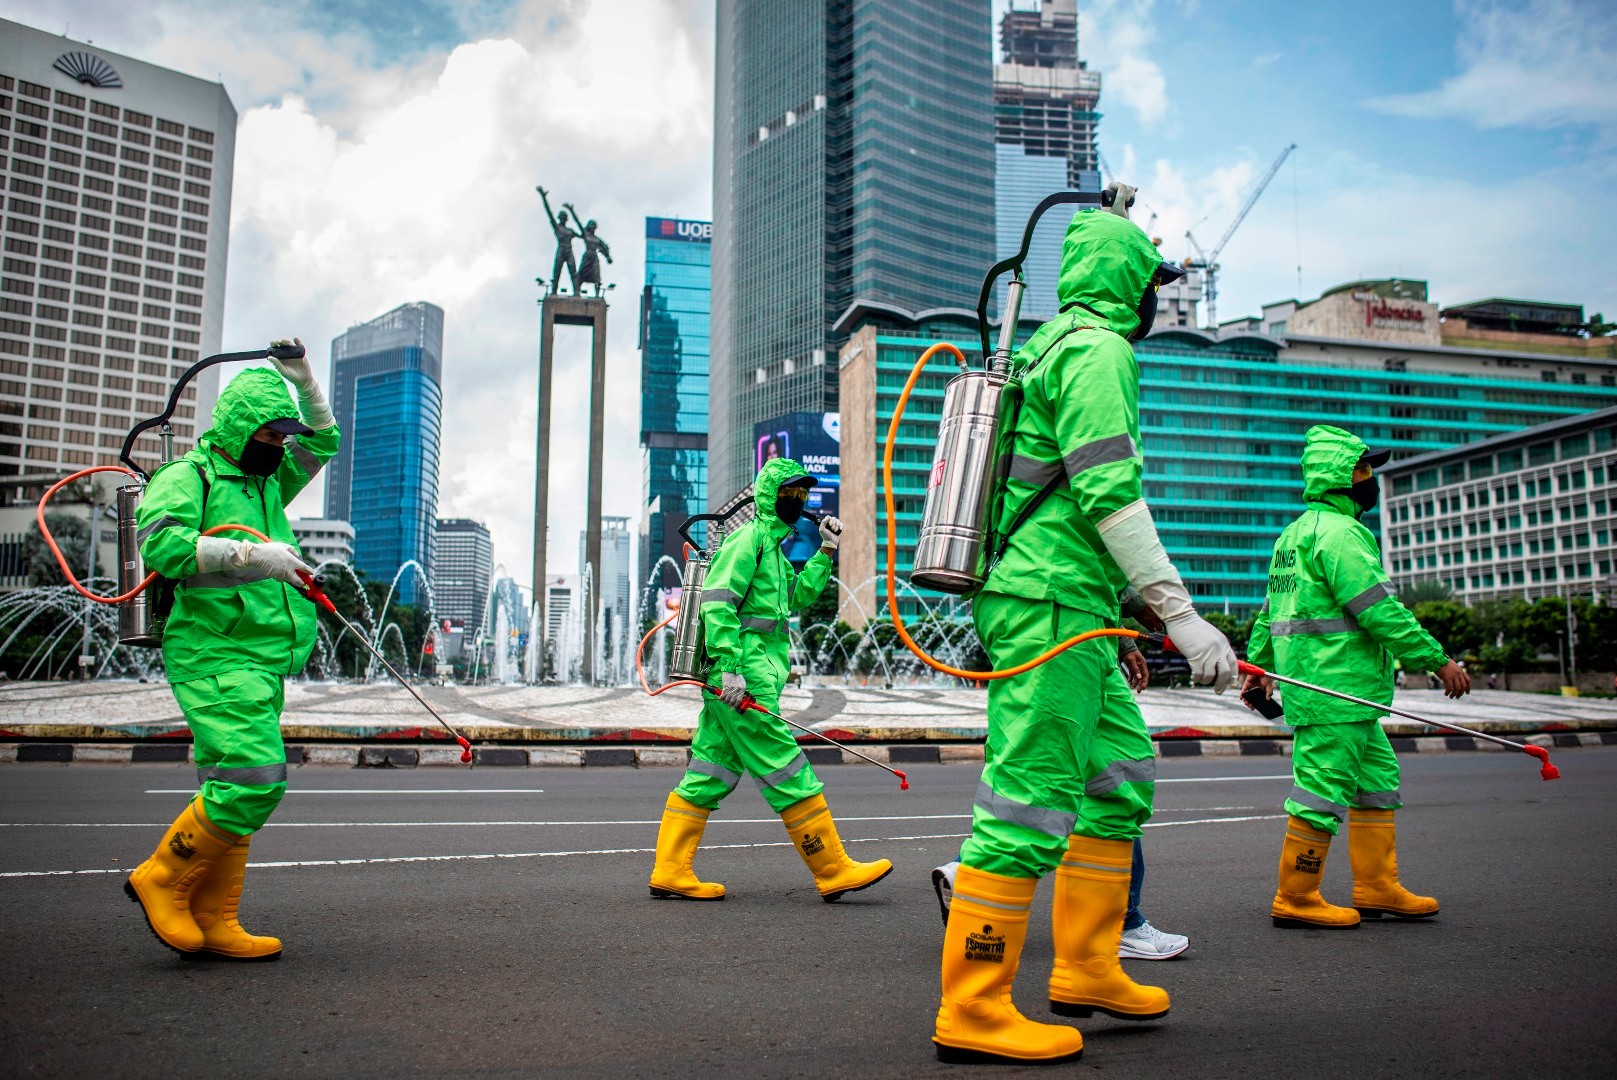 Workers spray disinfectant in Jakarta, Indonesia, on March 22, 2020. Photo: Antara Foto via Reuters